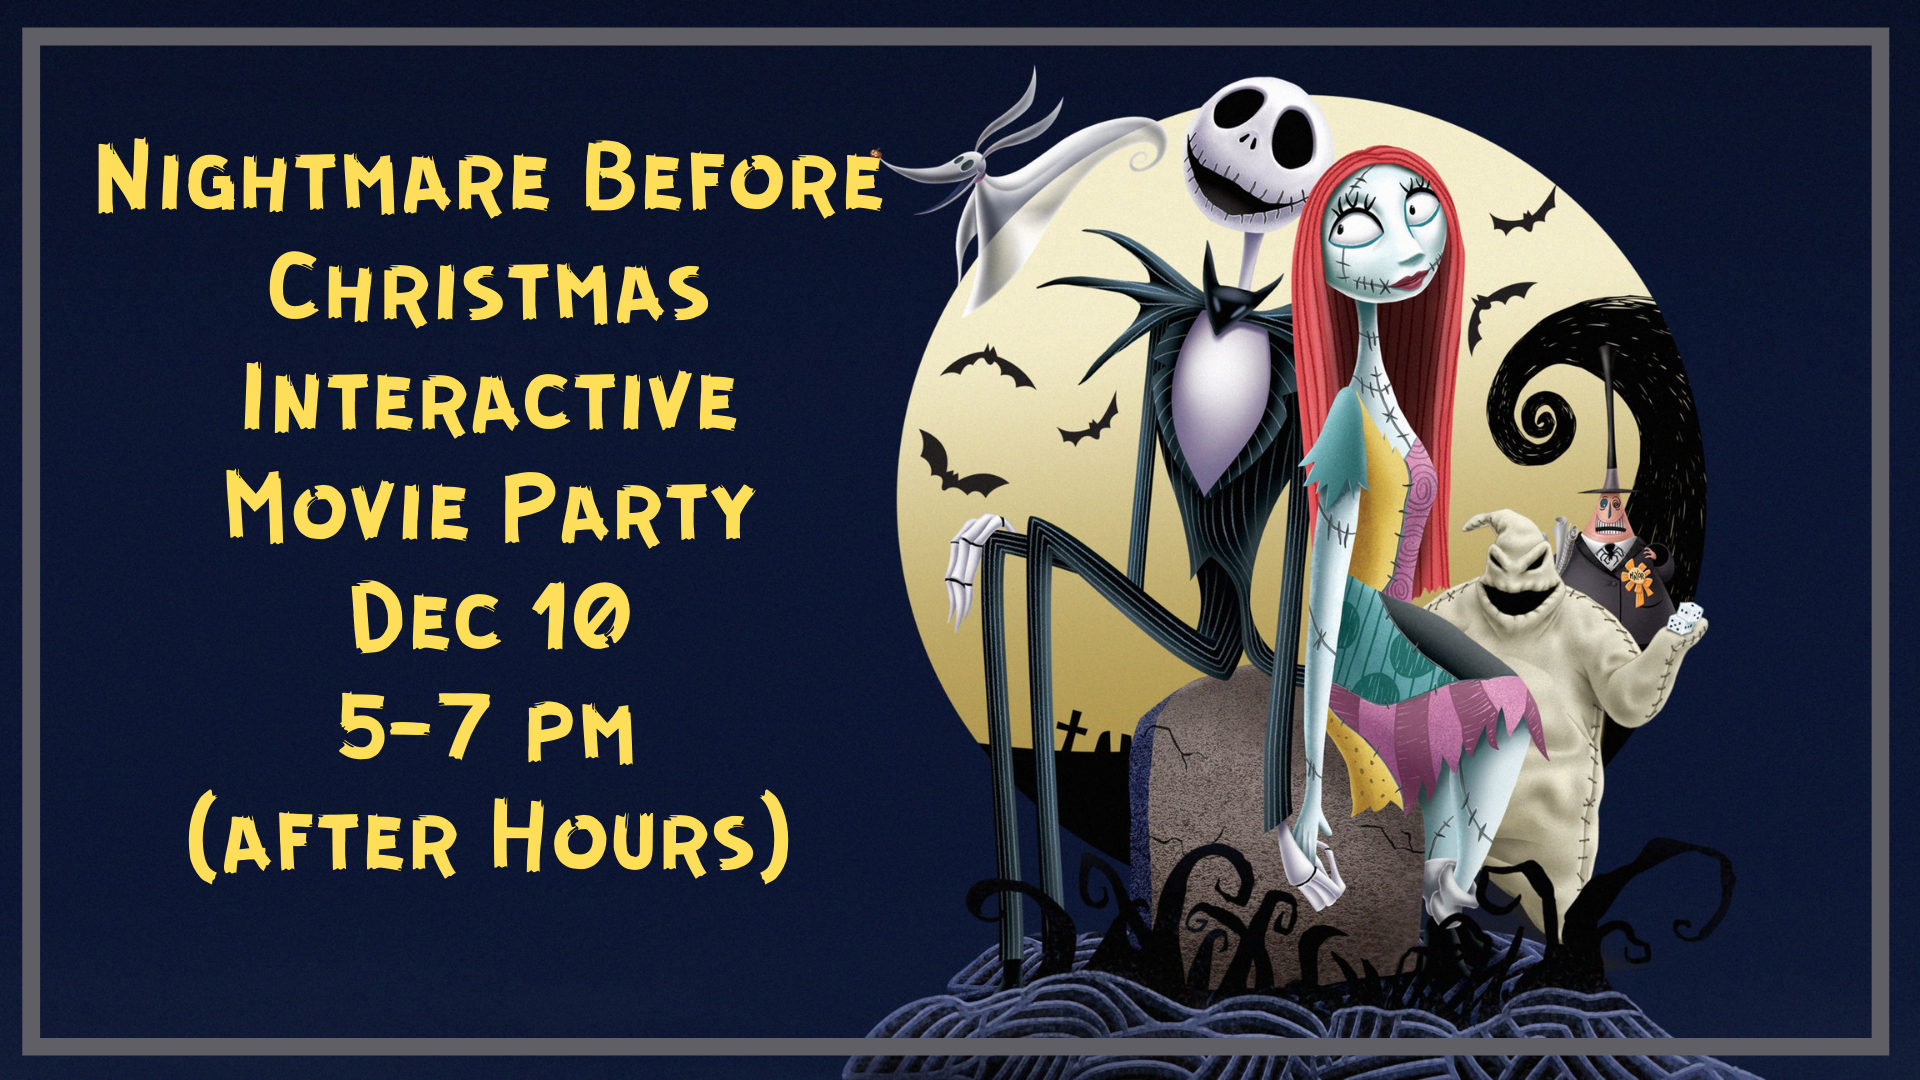 Volunteer at The Nightmare Before Christmas Interactive Movie Party